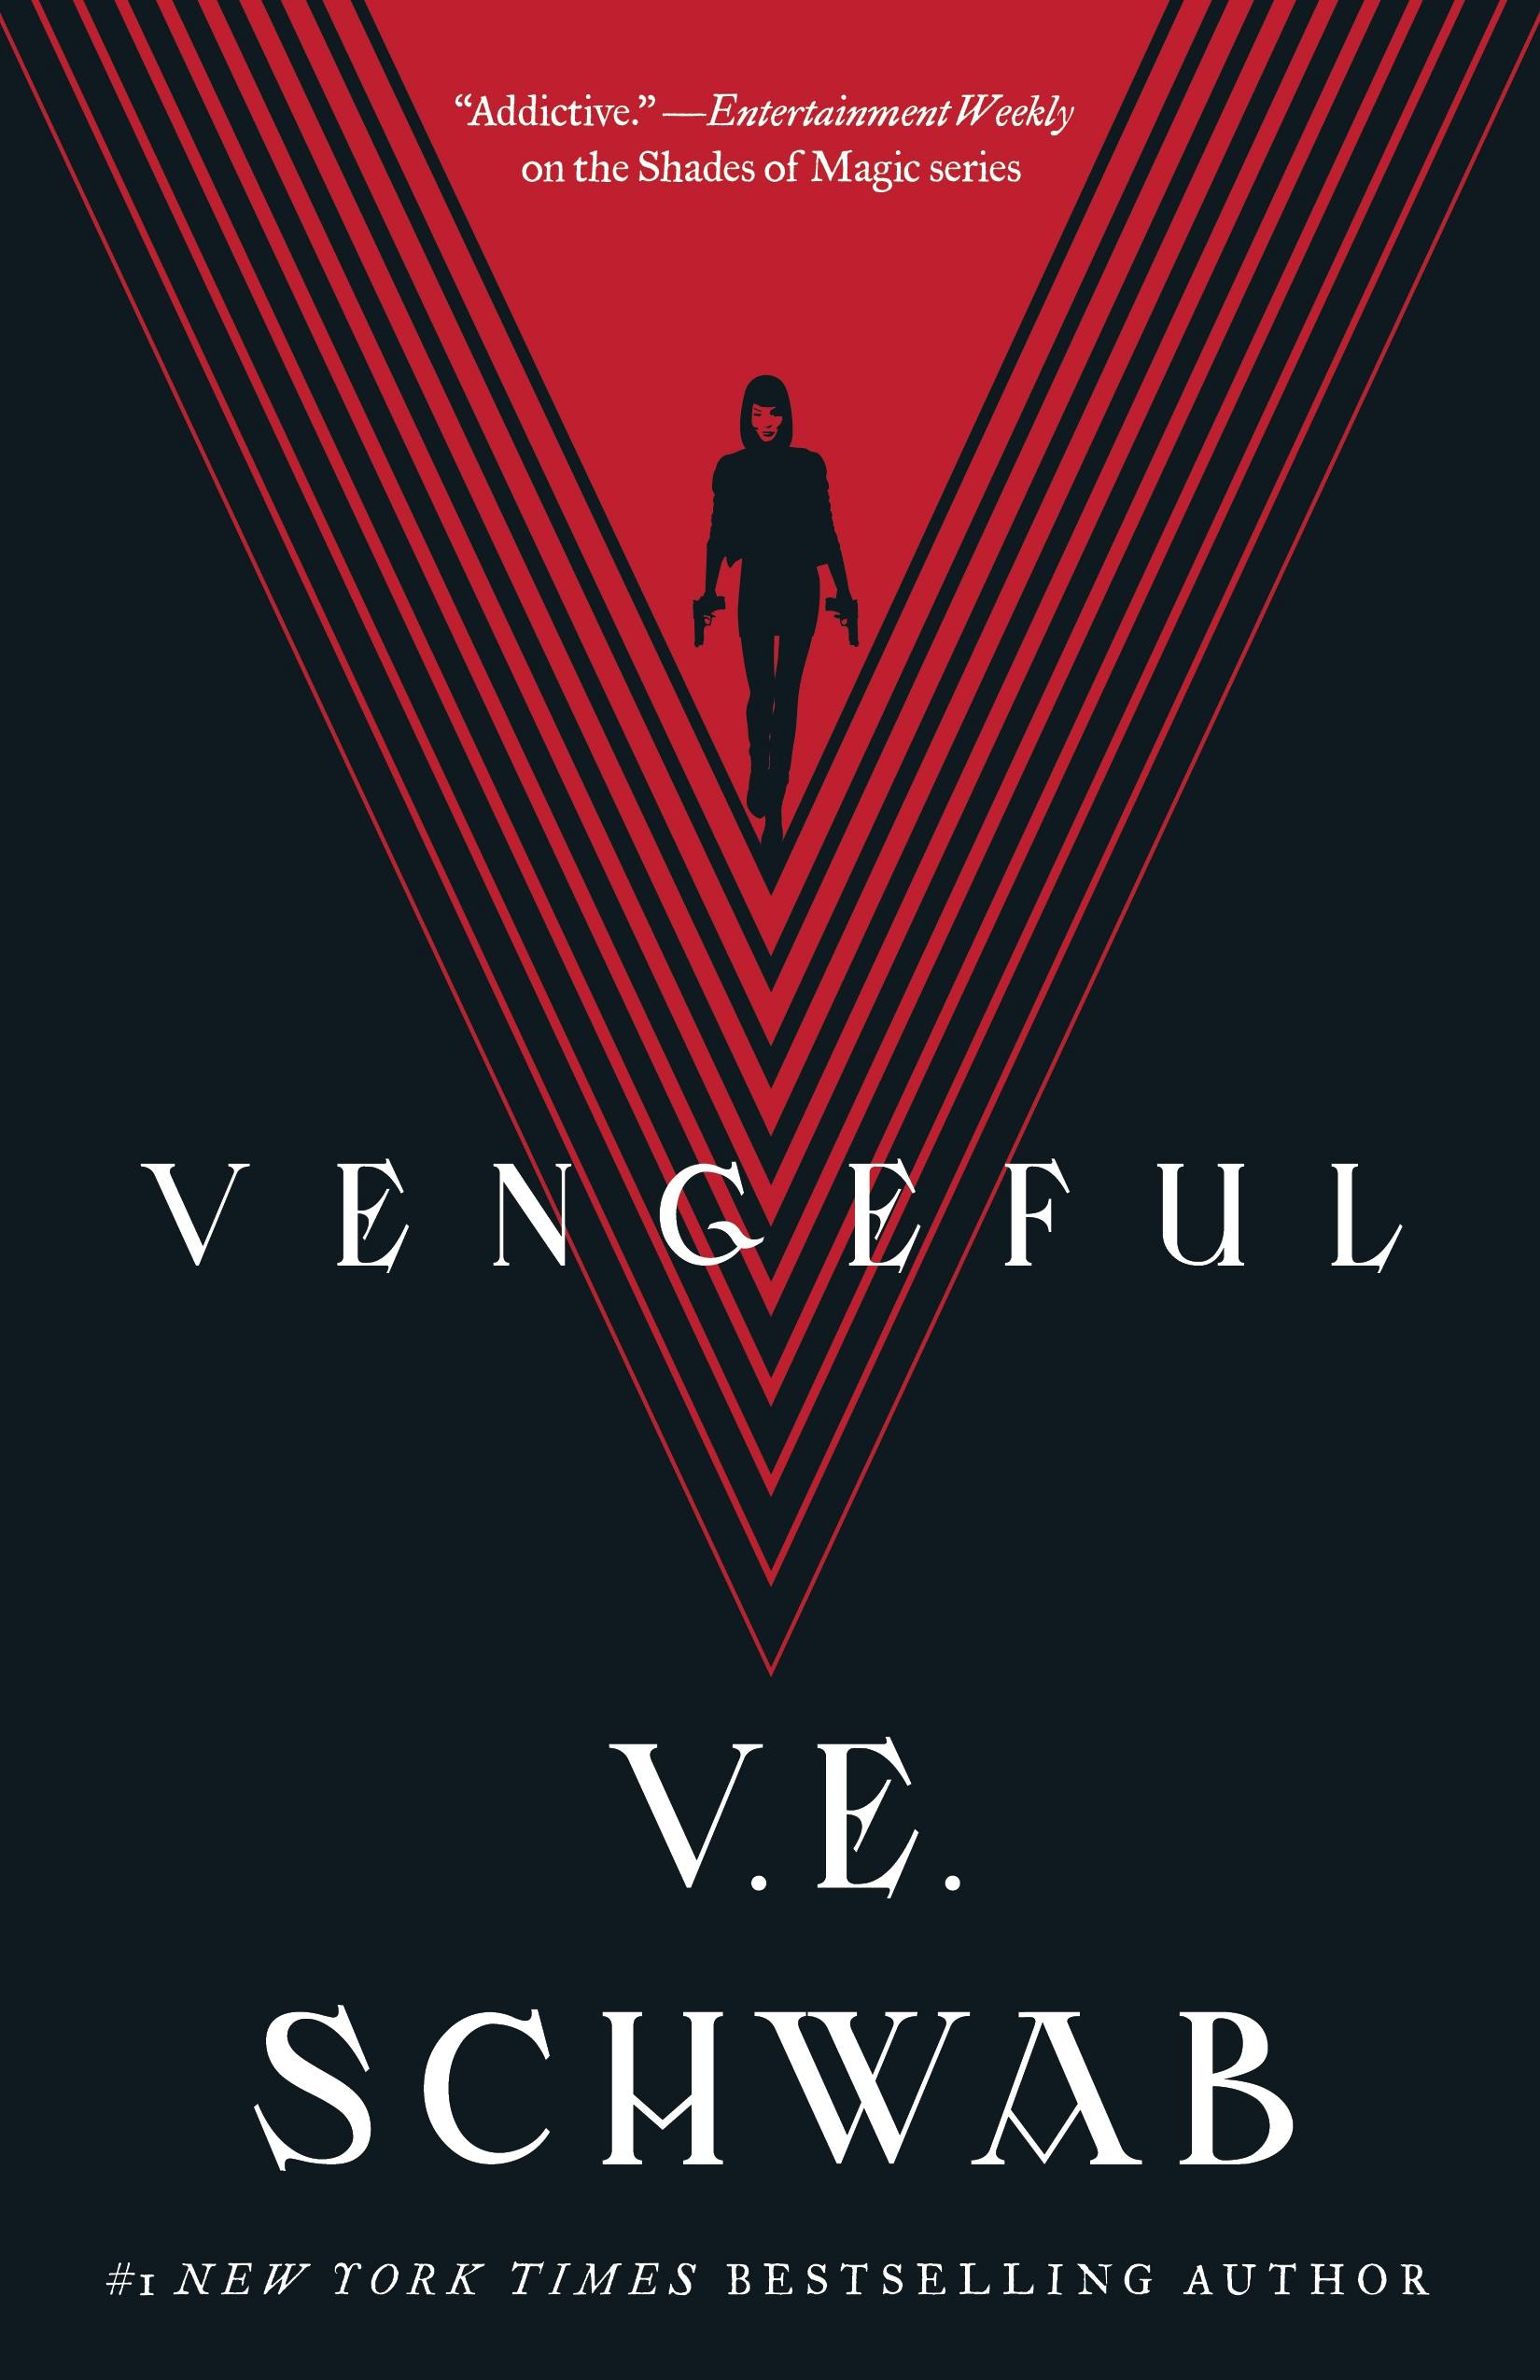 Cover for the book titled as: Vengeful